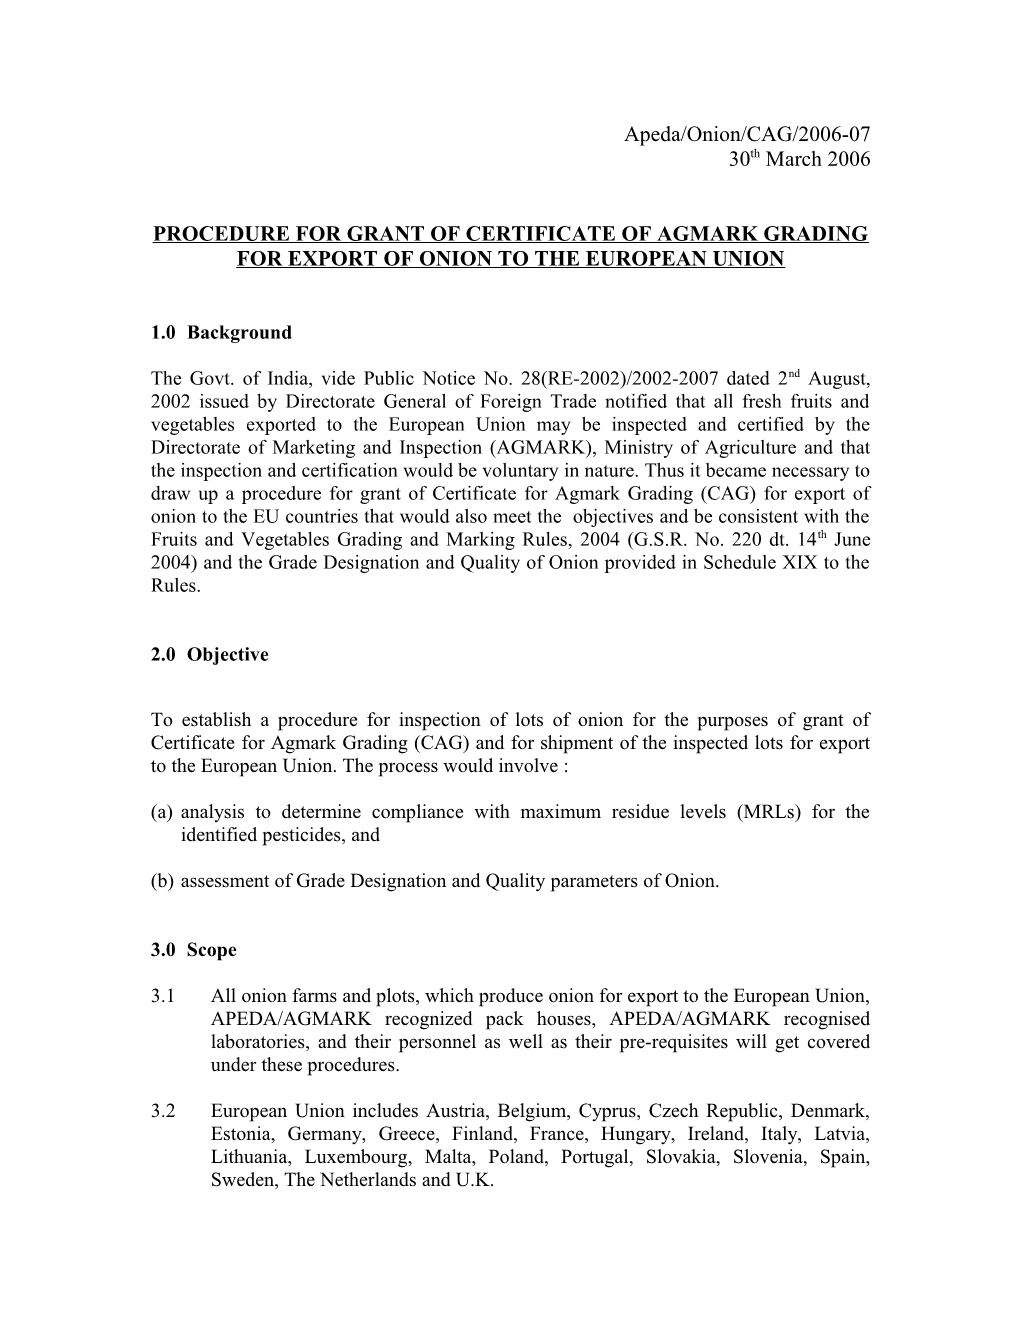 Procedure for Grant of Certificate of Agmark Grading for Export of Onion to the European Union